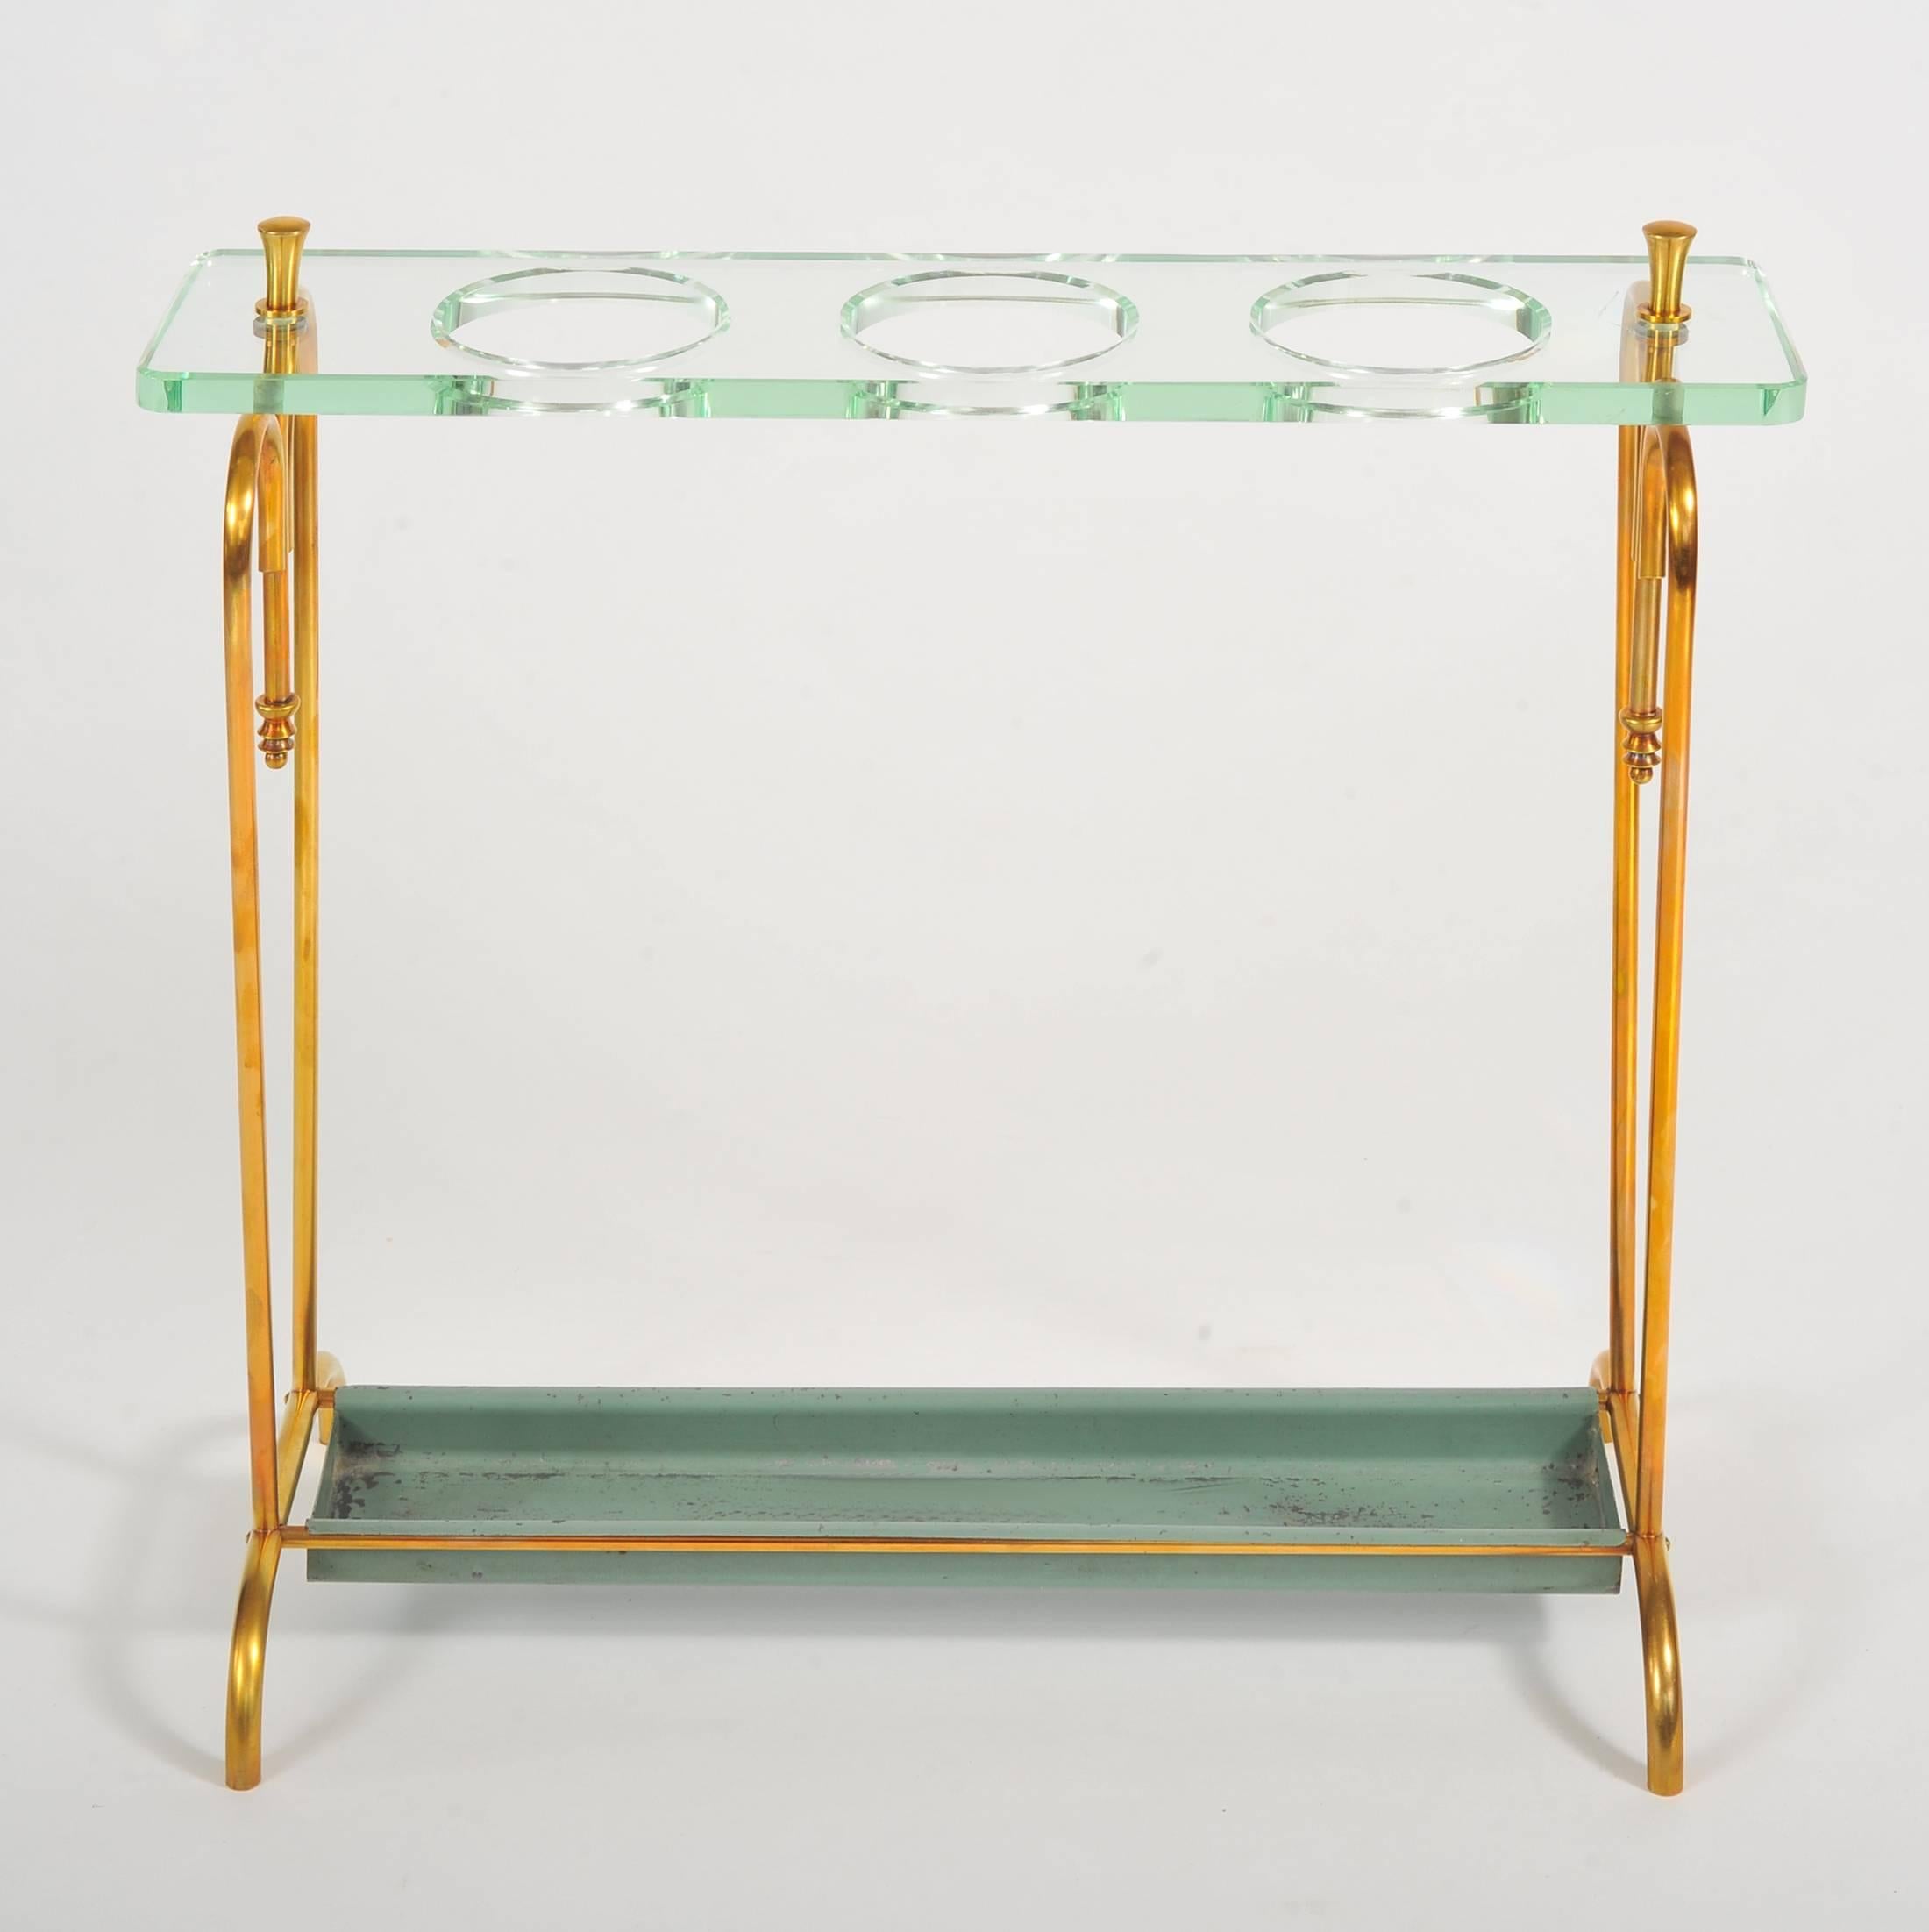 Functional and chic brass umbrella stand with thick glass shelf to hold multiple umbrellas. Green painted drip tray.